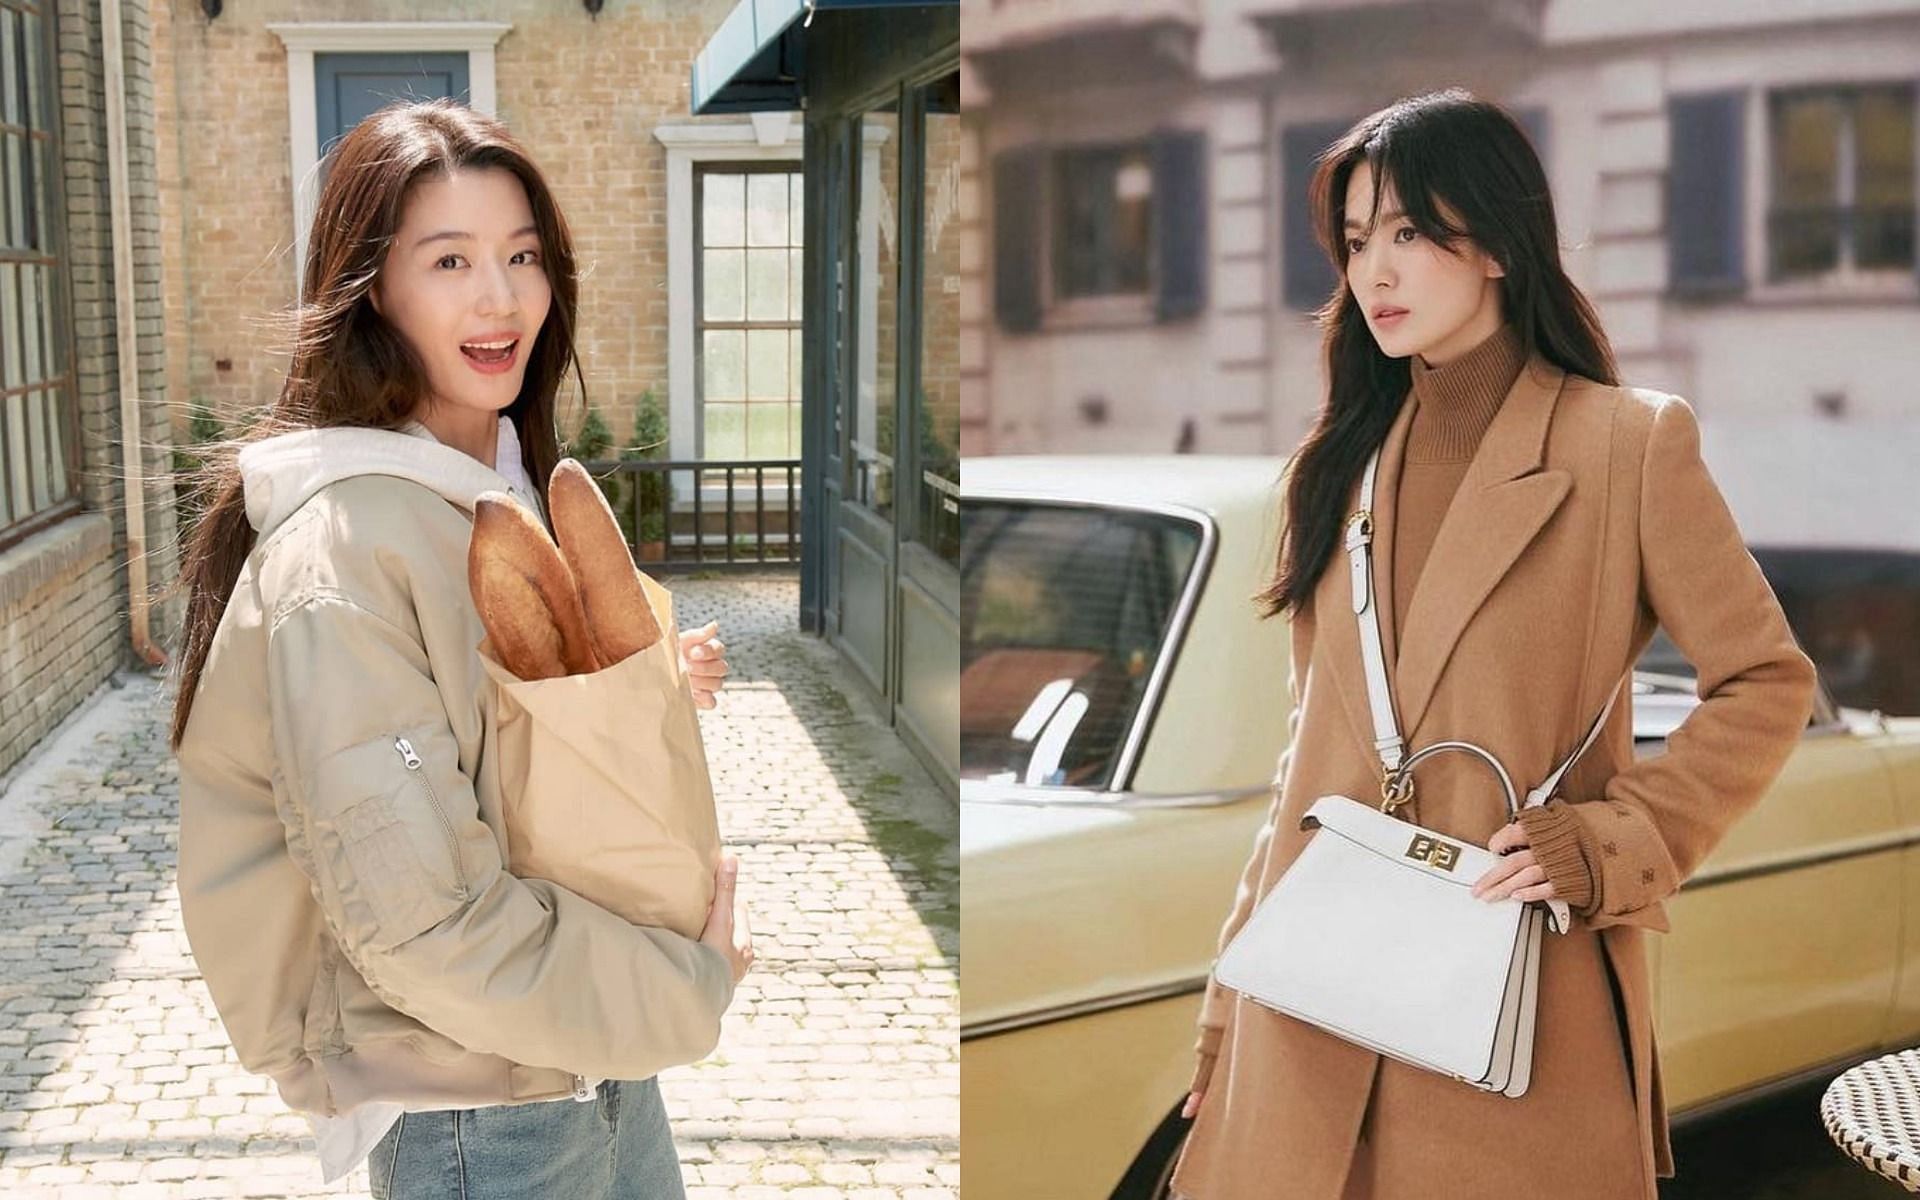 Jun Ji Hyun and Song Hye Kyo rise to the top with their pay rates (Images via Instagram/junjihyun.official/kyo1122)